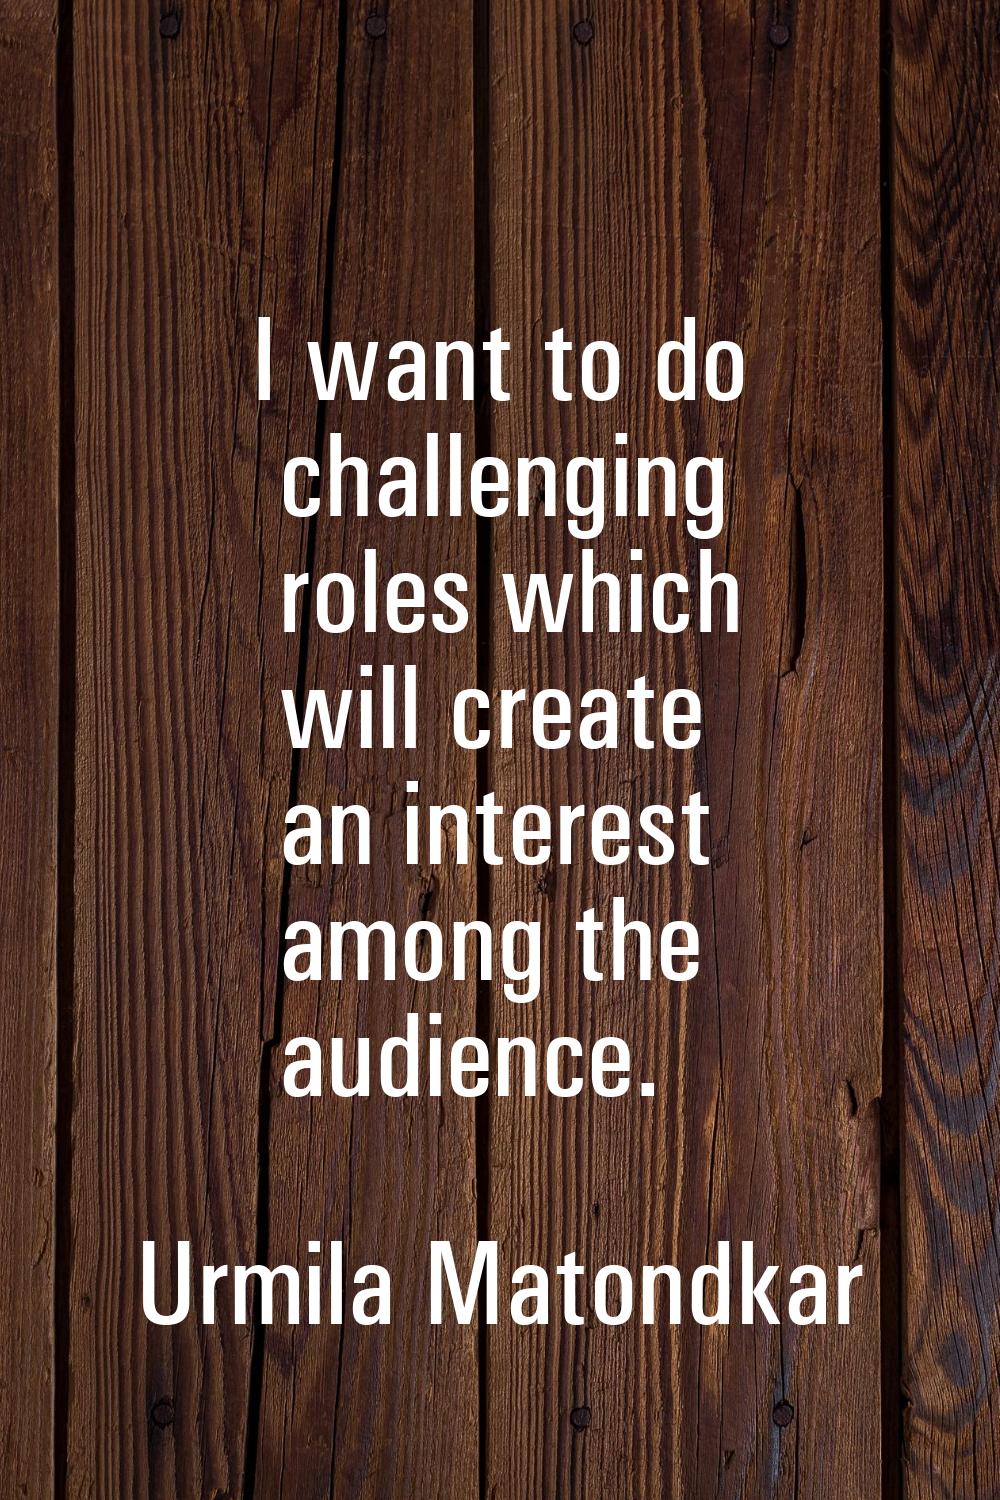 I want to do challenging roles which will create an interest among the audience.